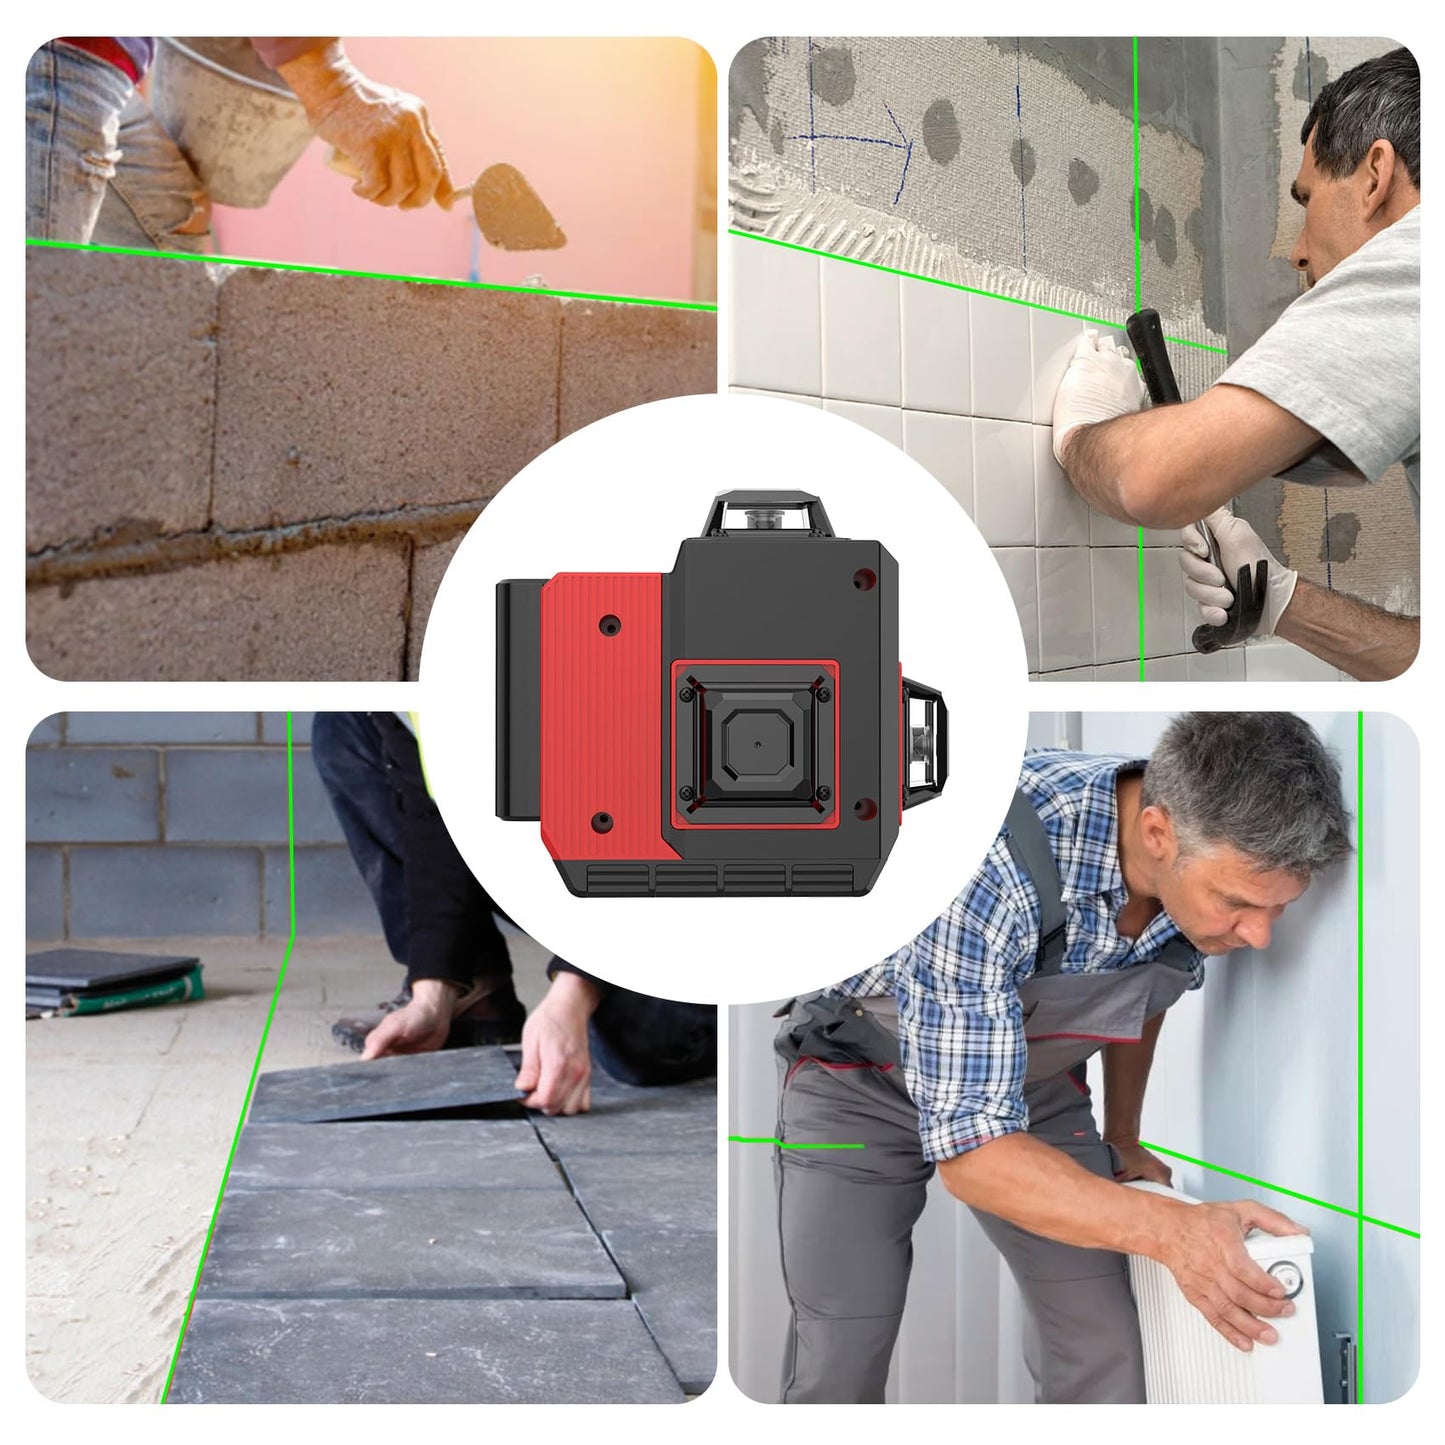 12 Lines Laser Level 3x360° Self Leveling Green Laser Level,3D Green Cross Line for Construction and Picture Hanging,Laser measurement calibration